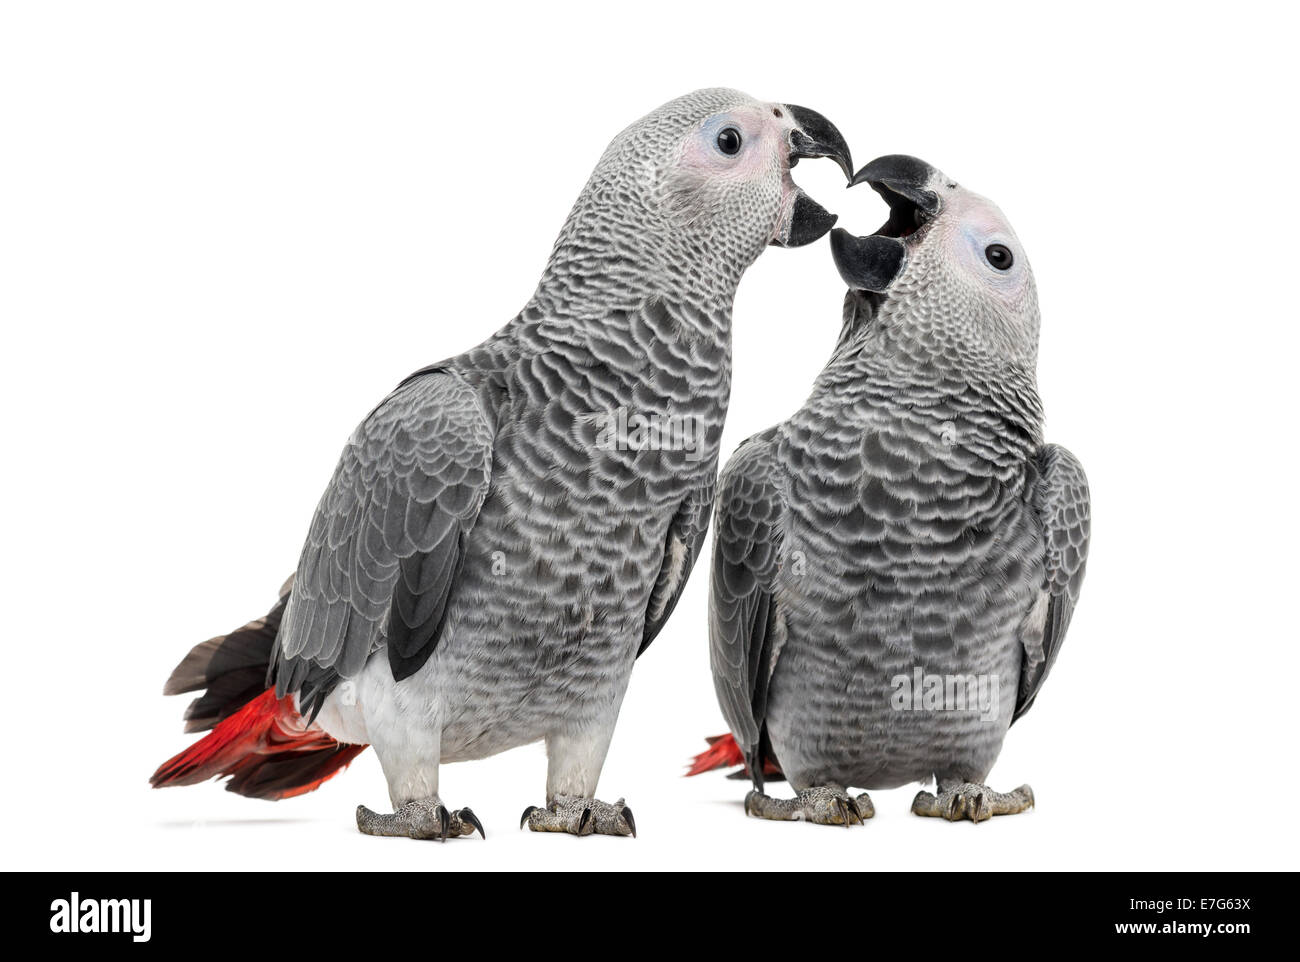 Two African Grey Parrots (3 months old) pecking against white background Stock Photo